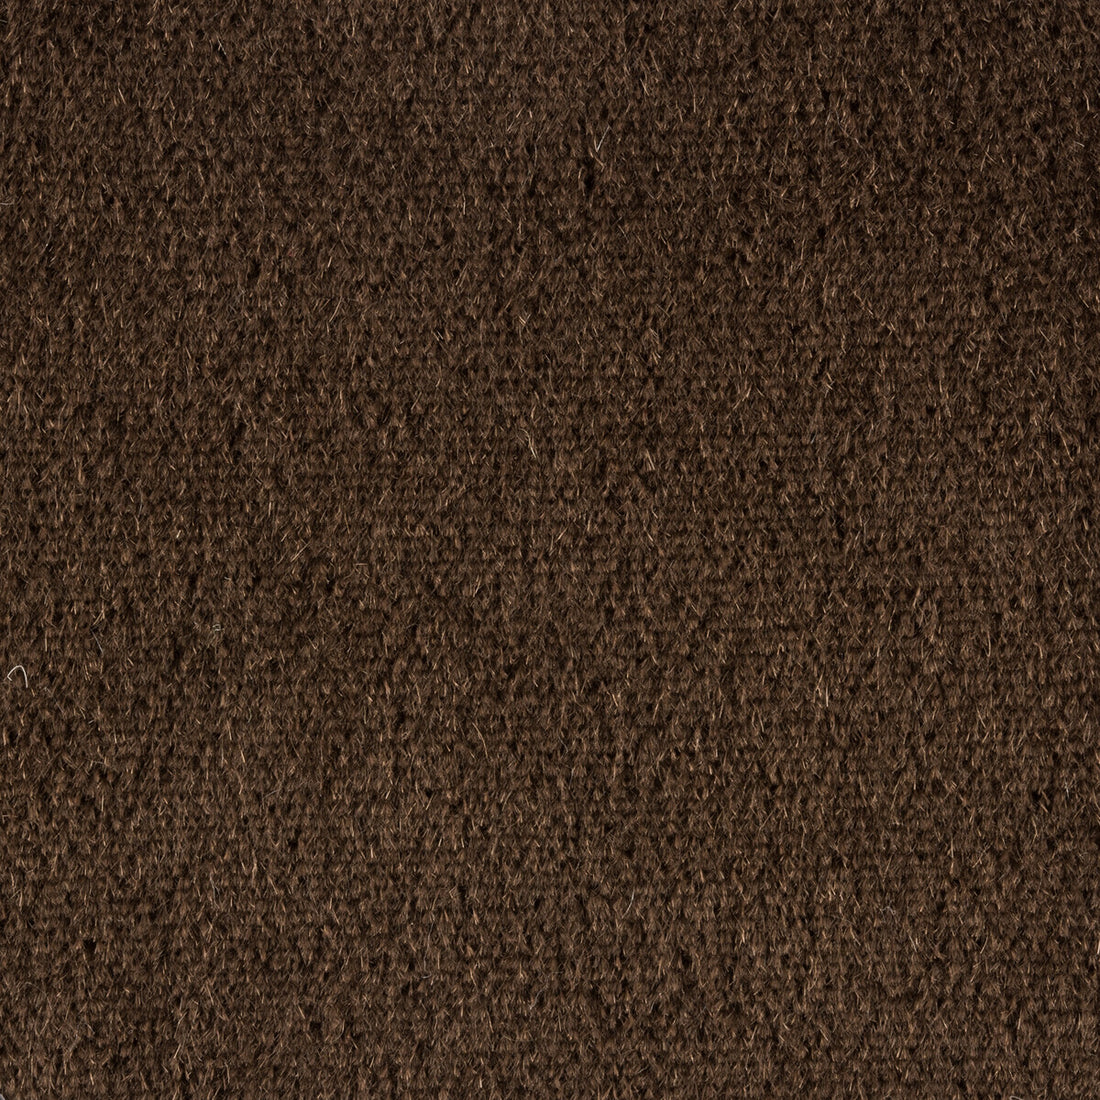 Plazzo Mohair fabric in java color - pattern 34259.871.0 - by Kravet Couture